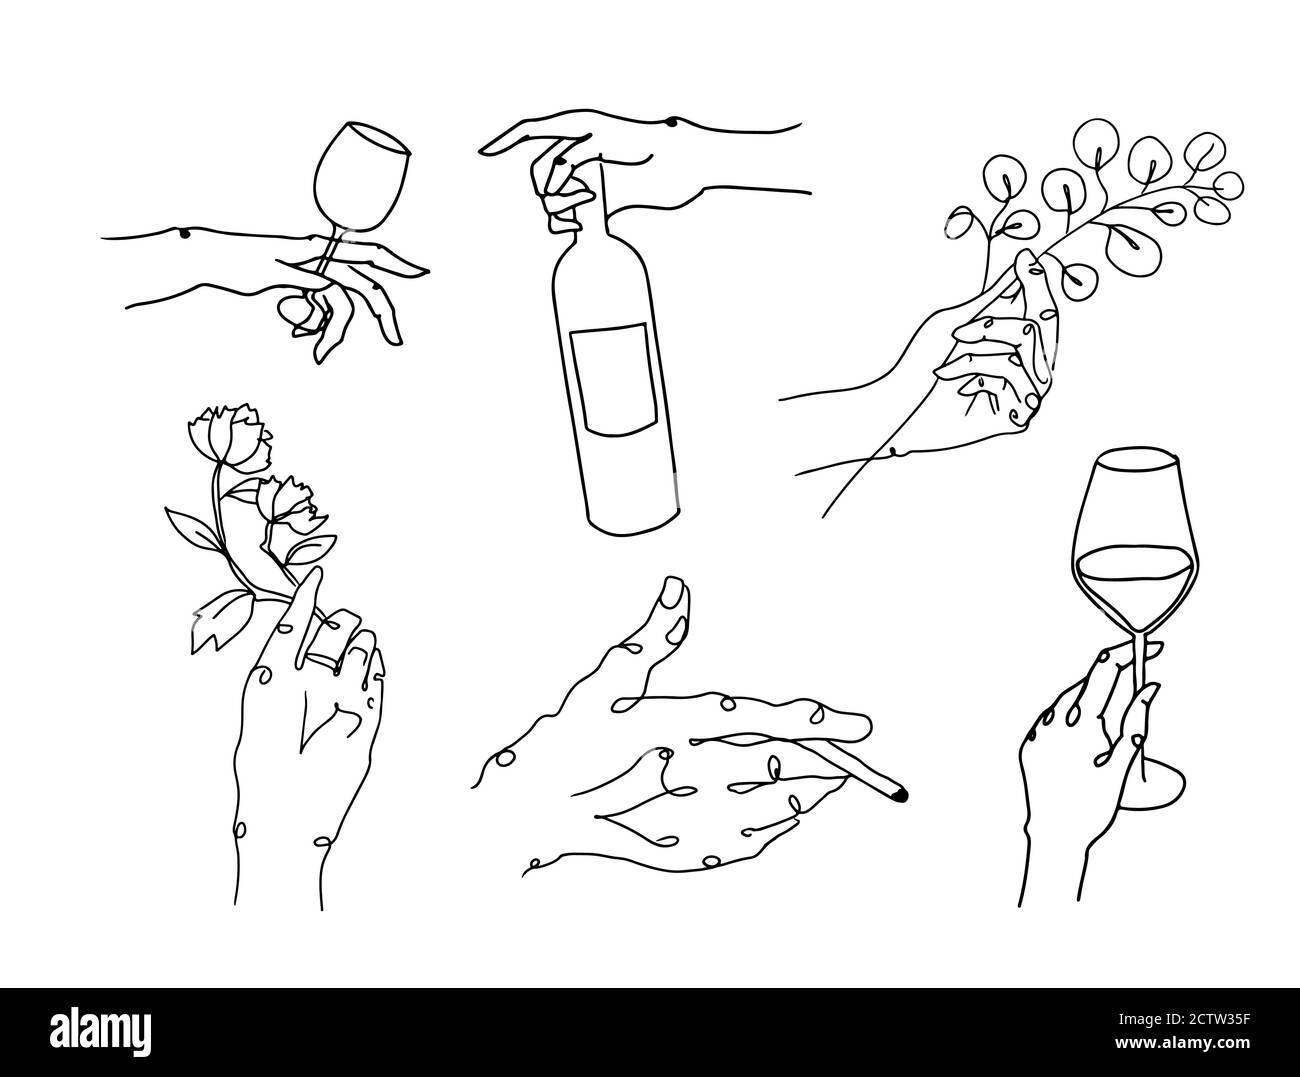 Soft vector illustration one line set of arm and hand. Stock Photo